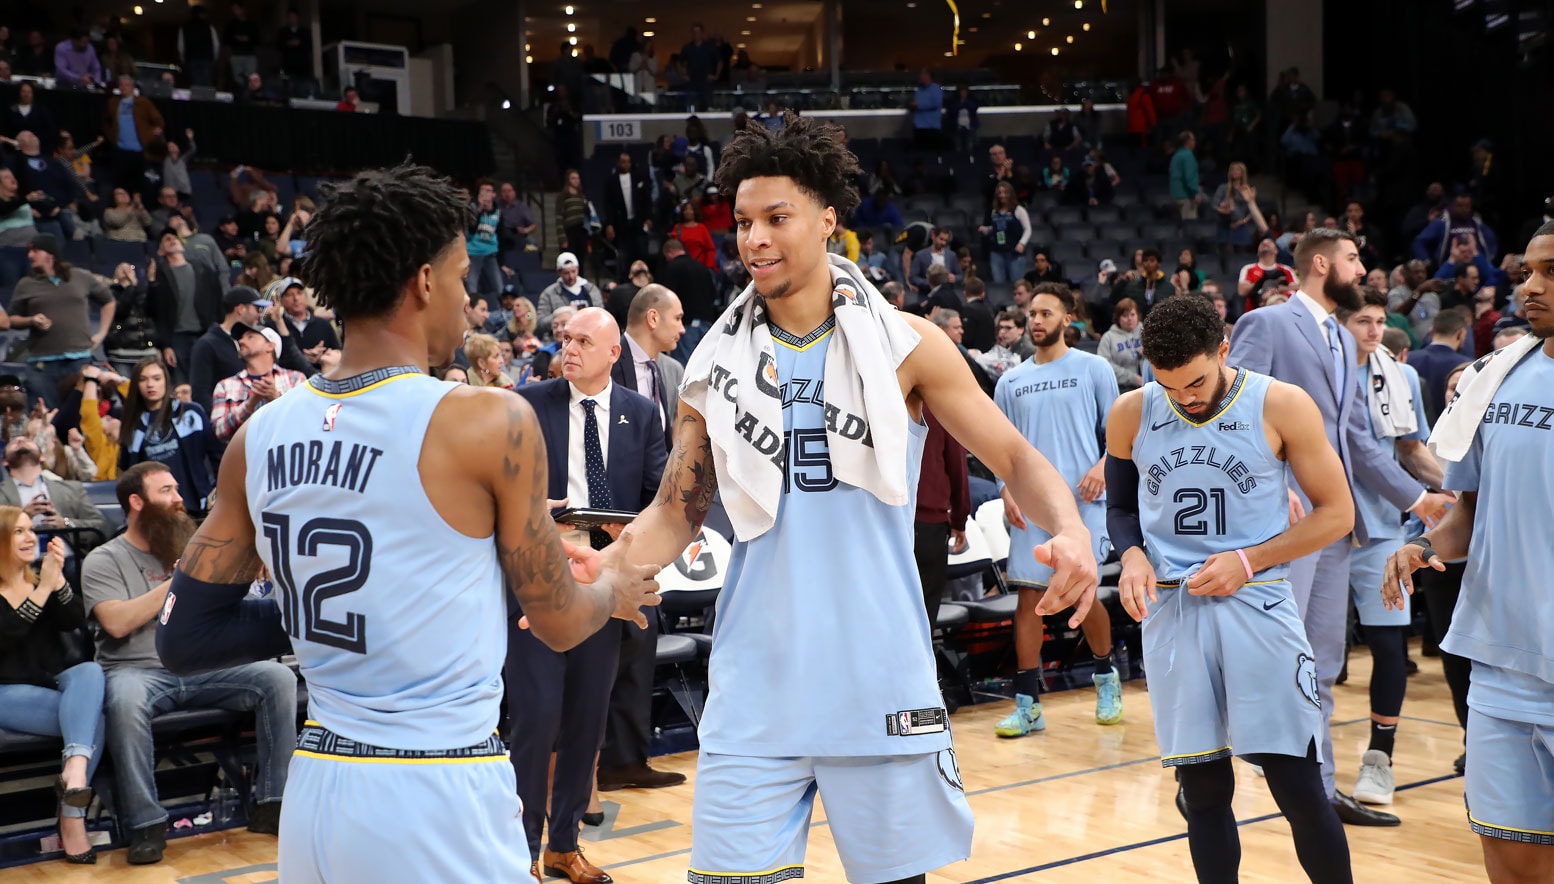 MikeCheck: Morant, Clarke maintain pace as NBA’s most productive rookie duo as Grizzlies enter 2020